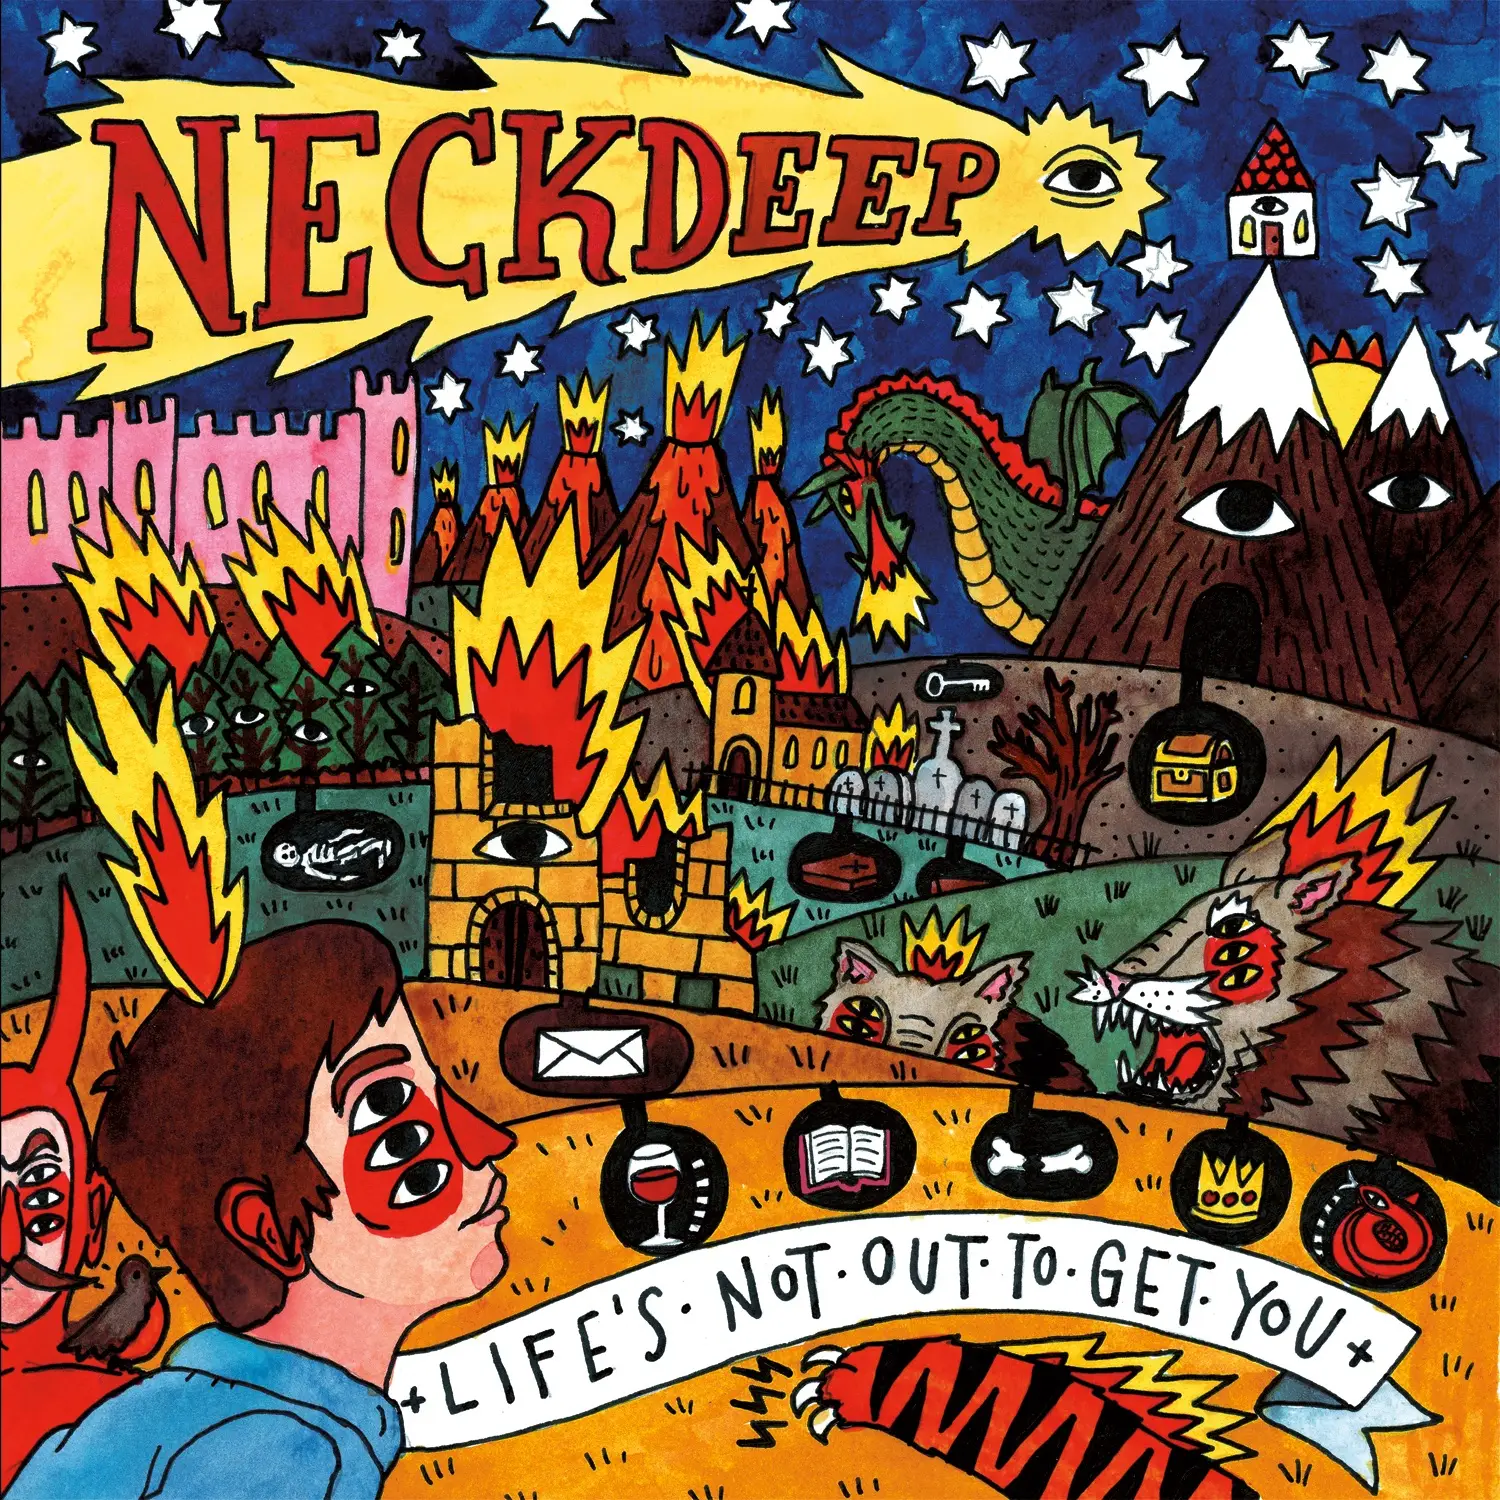 <strong>Neck Deep - Life’s Not Out To Get You</strong> (Vinyl LP - pink)